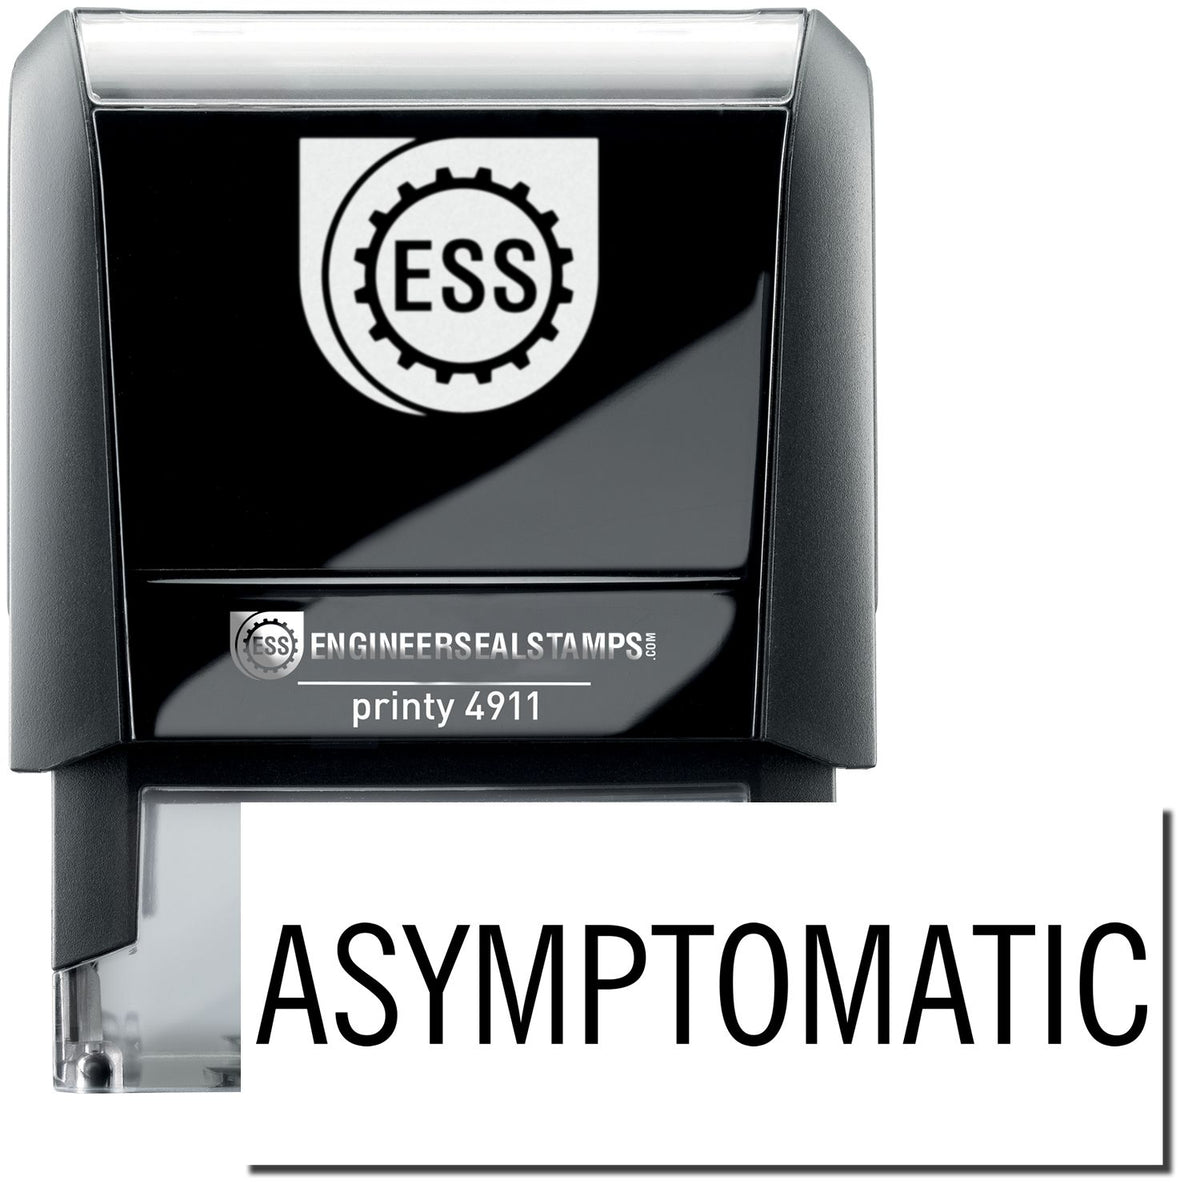 A self-inking stamp with a stamped image showing how the text &quot;ASYMPTOMATIC&quot; is displayed after stamping.